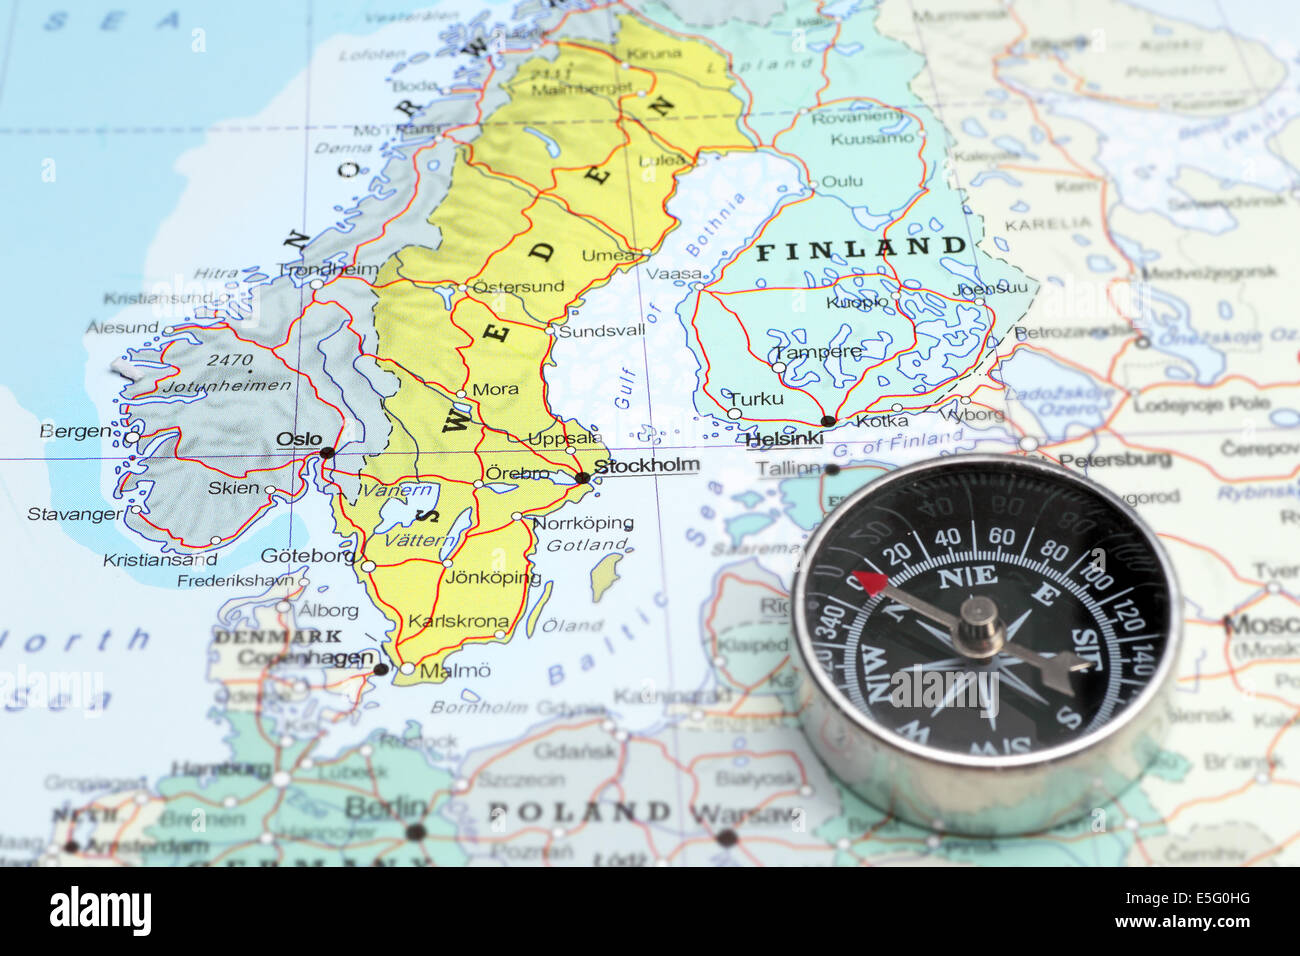 Compass on a map pointing at Norway Sveden and Finland, planning a travel destination in Scandinavia Stock Photo